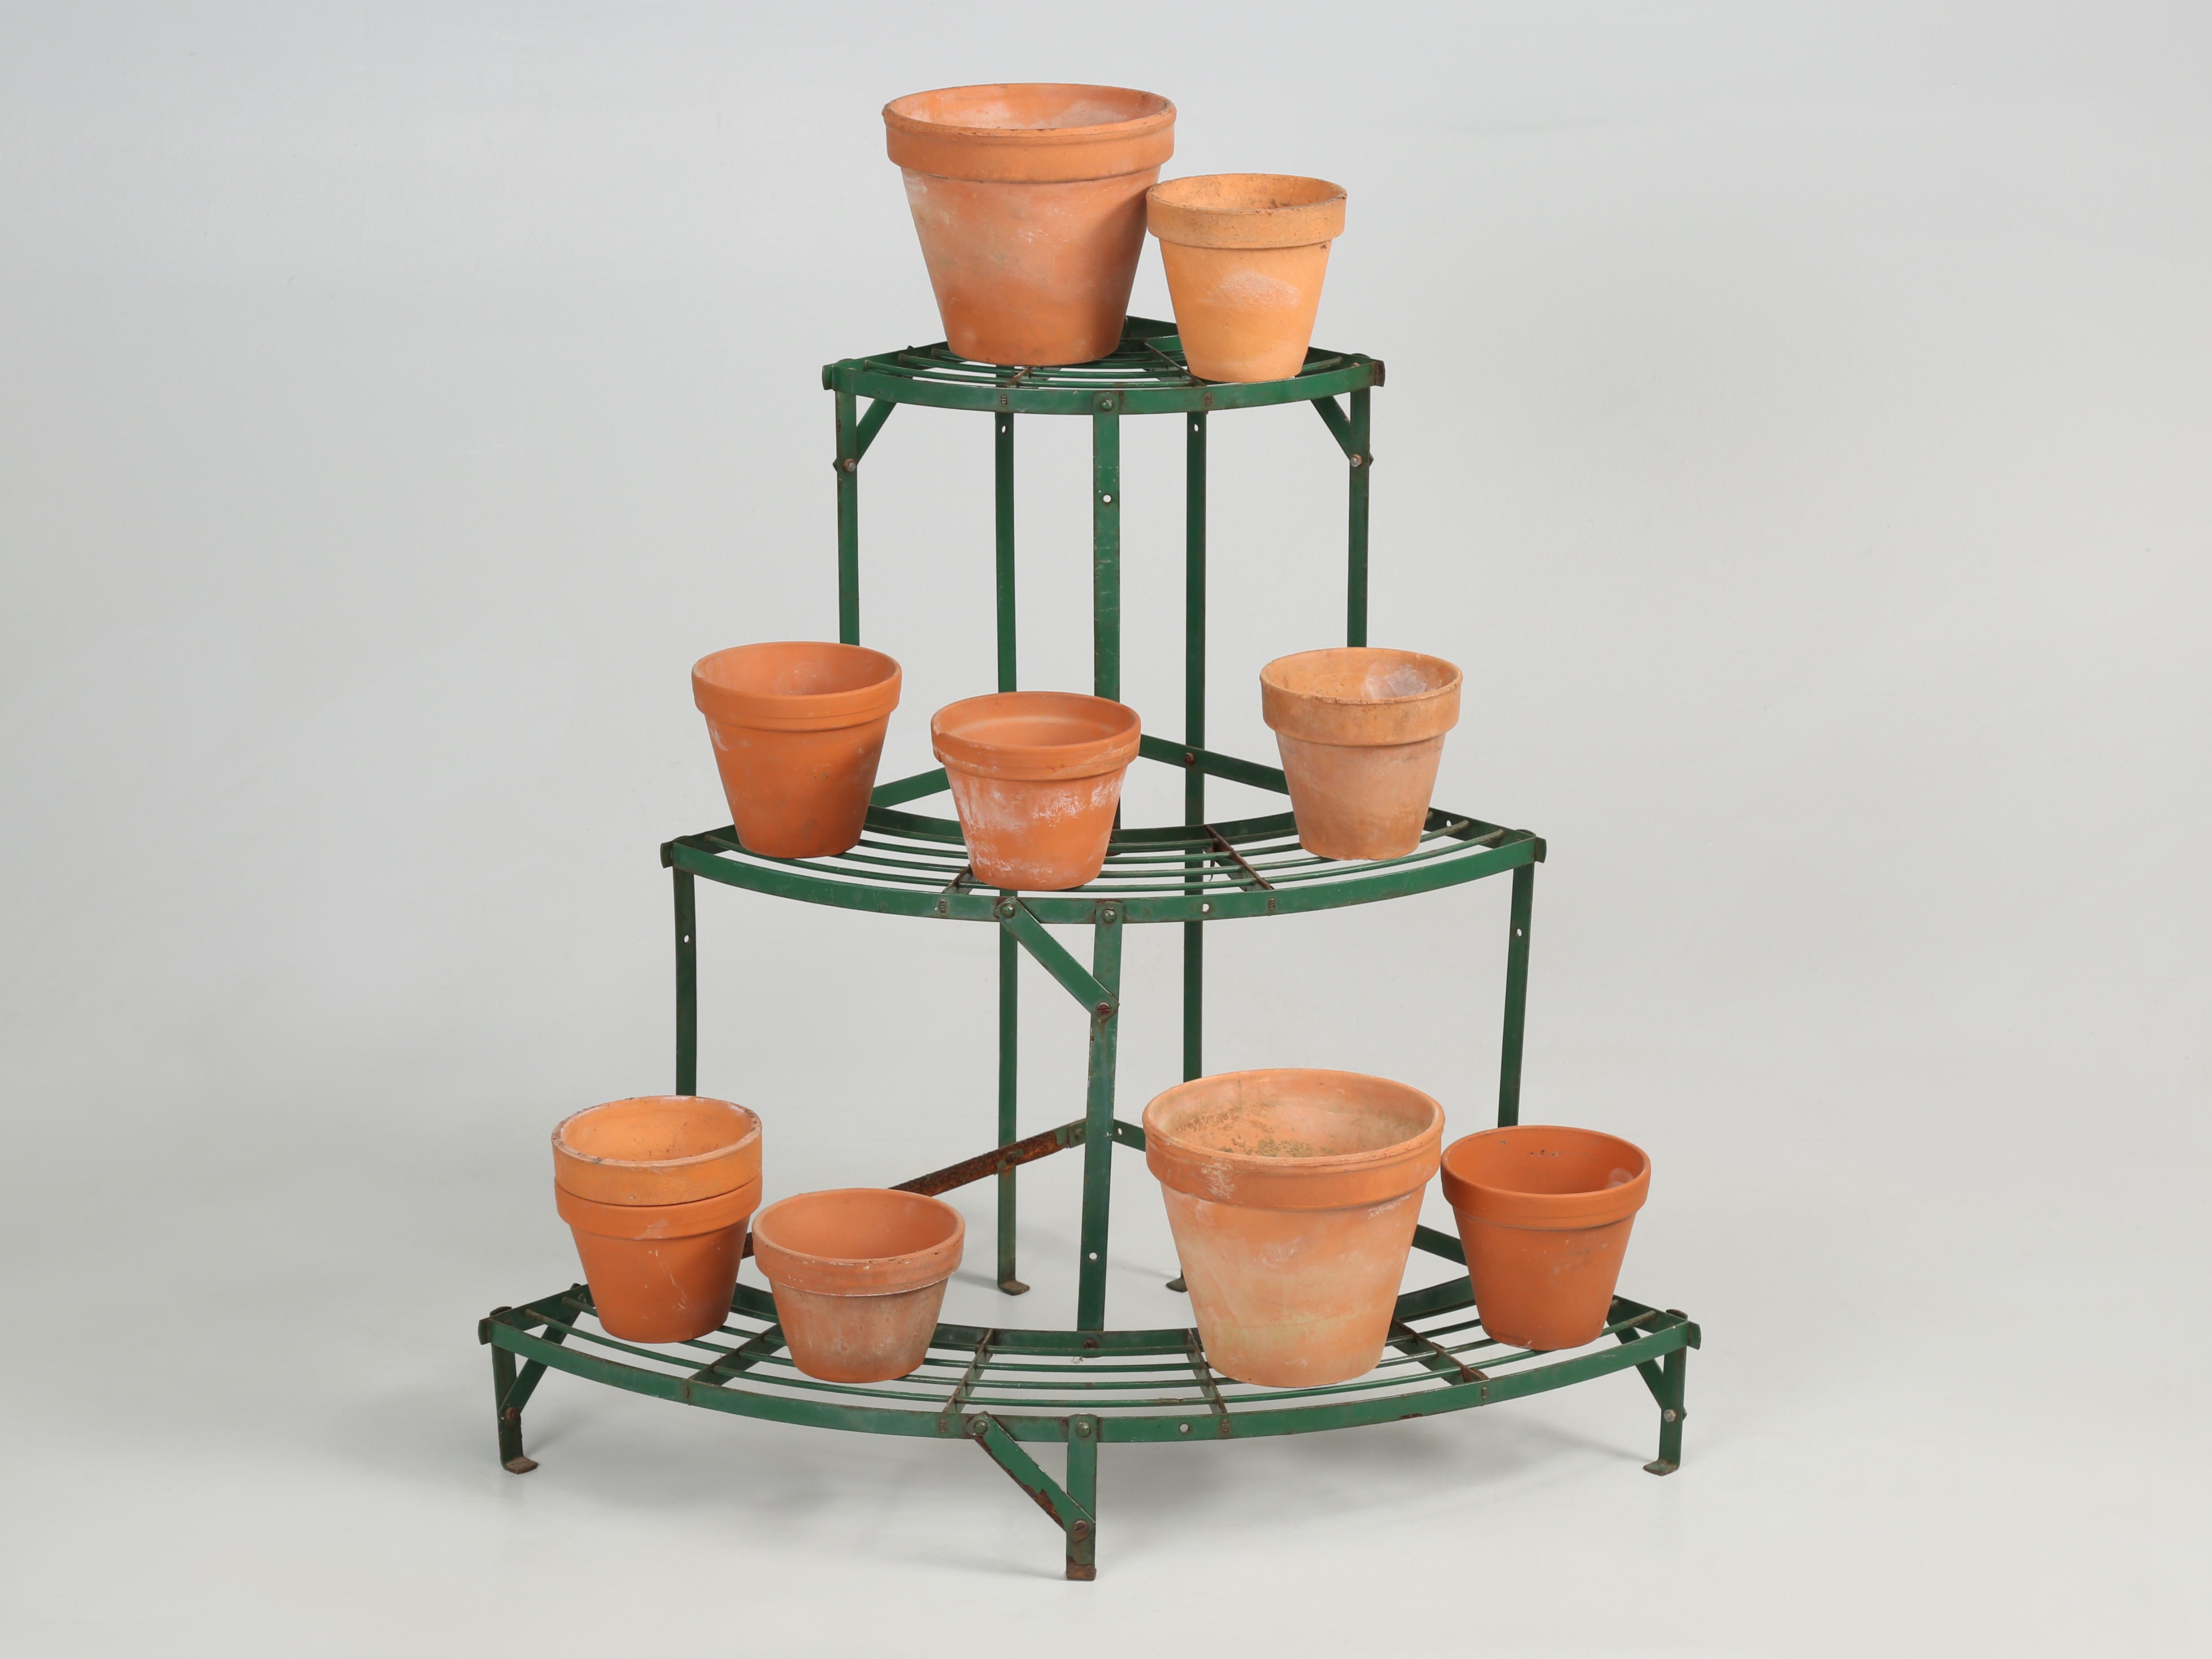 Vintage English 3-tier demilune design plant stand from County Staffordshire UK, suitable for indoor or outdoor applications.